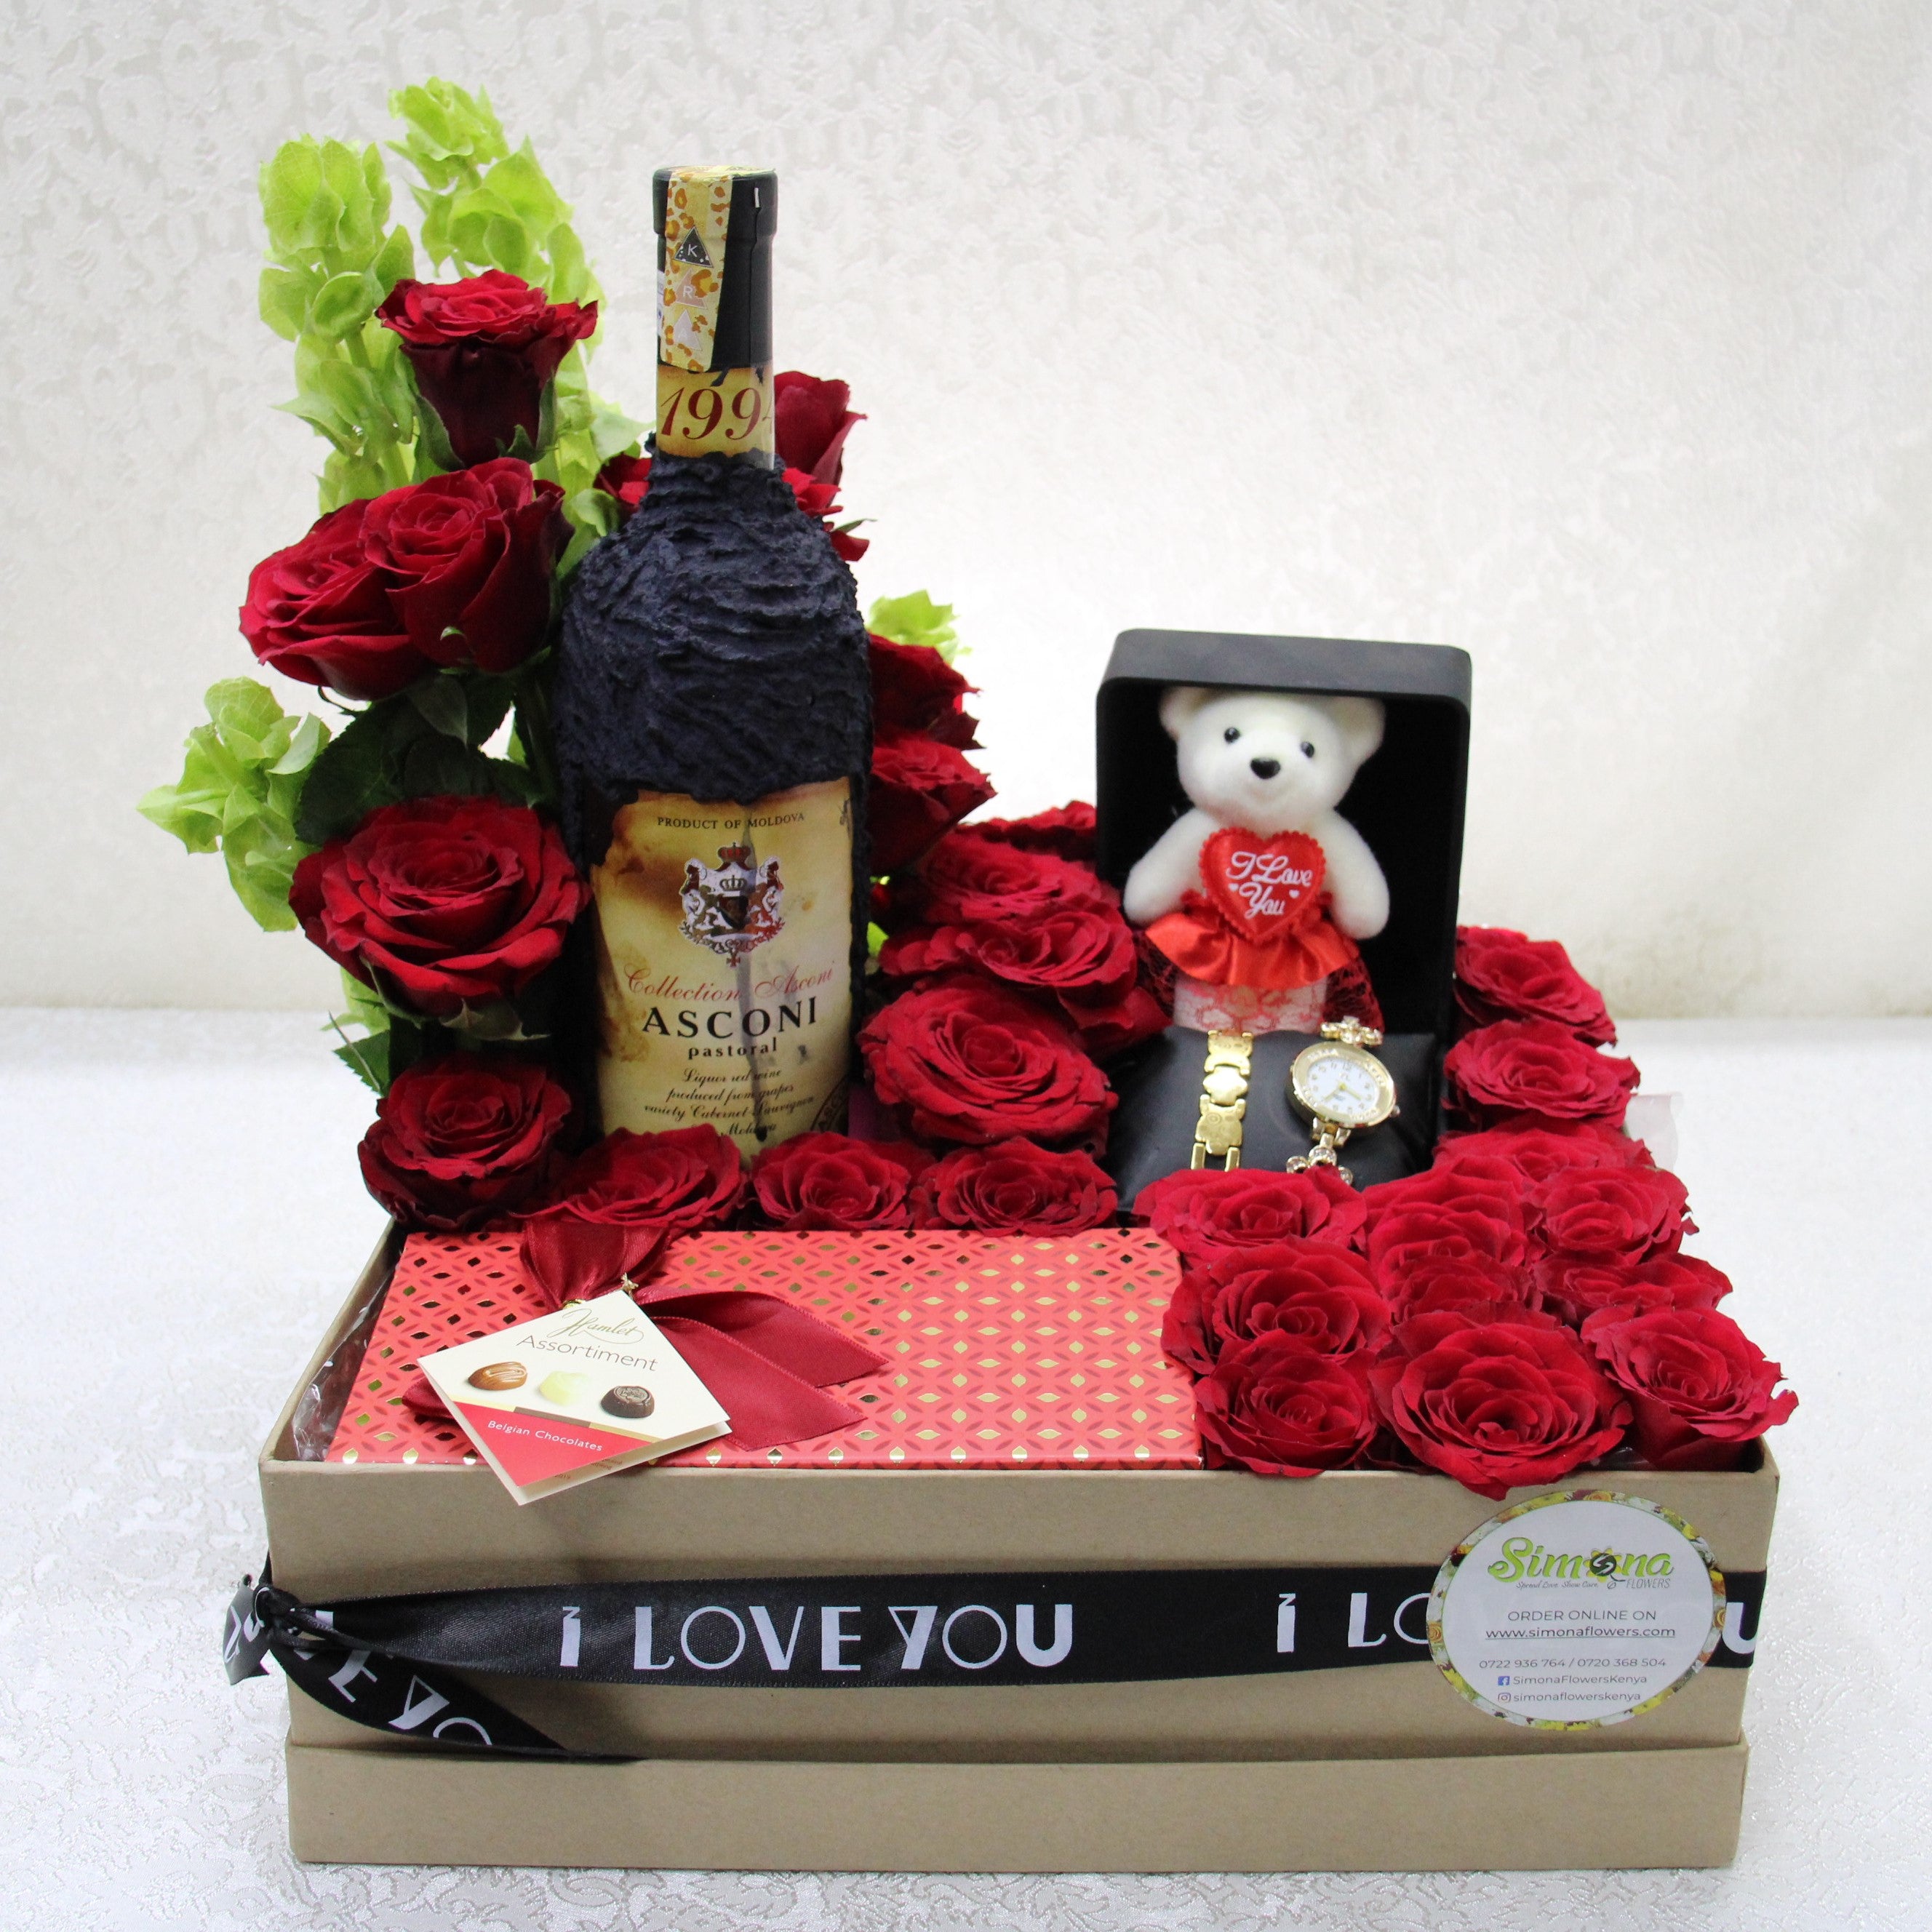 Simona Flowers - The intimate is a thoughtful pack of assorted gifts. The nice valentines surprise combo includes:   The Asconi wine A chain and bracelet set A small I love you teddy bear  A tasty box of hamlet love chocolates A well-arranged box of red valentine roses.